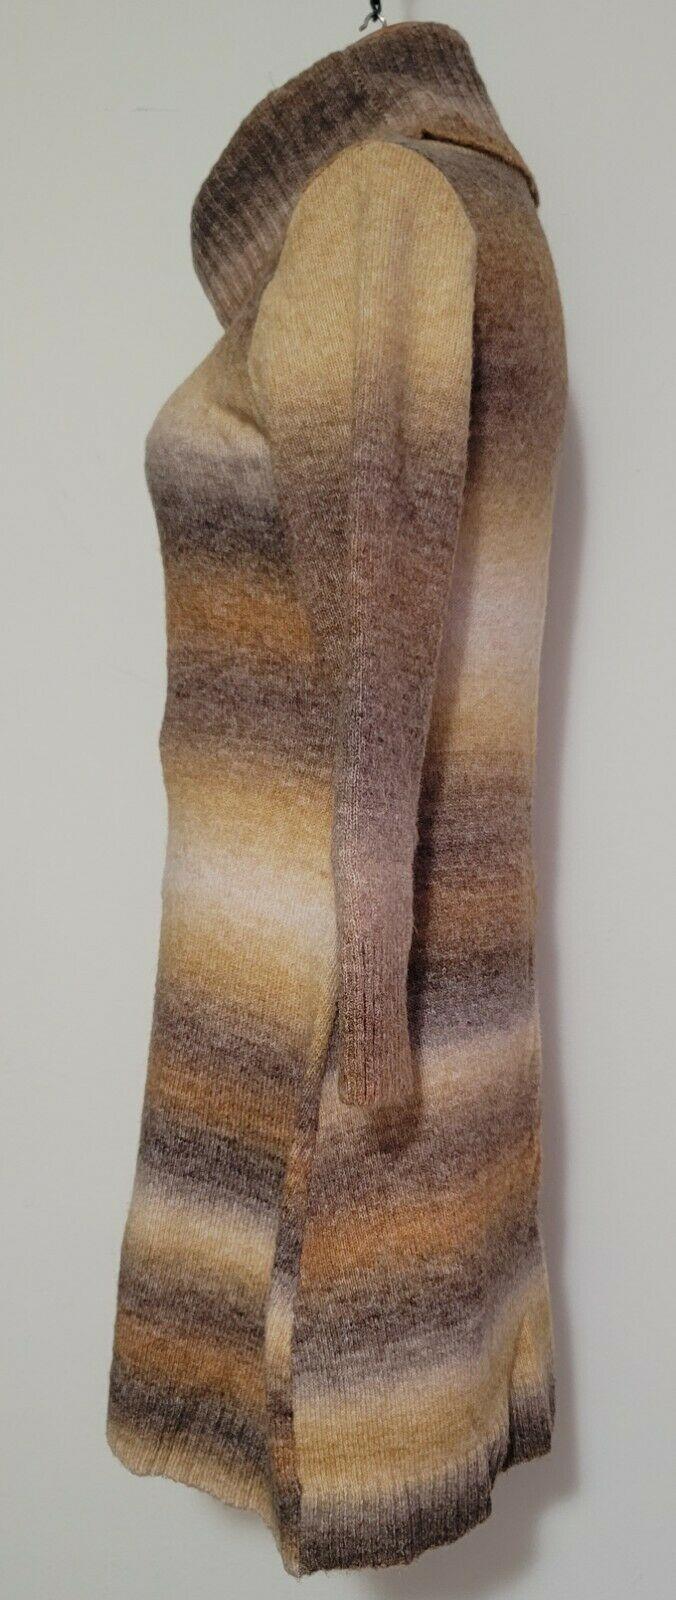 RONNI NICOLE  Brown Ombre Knit Sweater Dress Size S - SVNYFancy